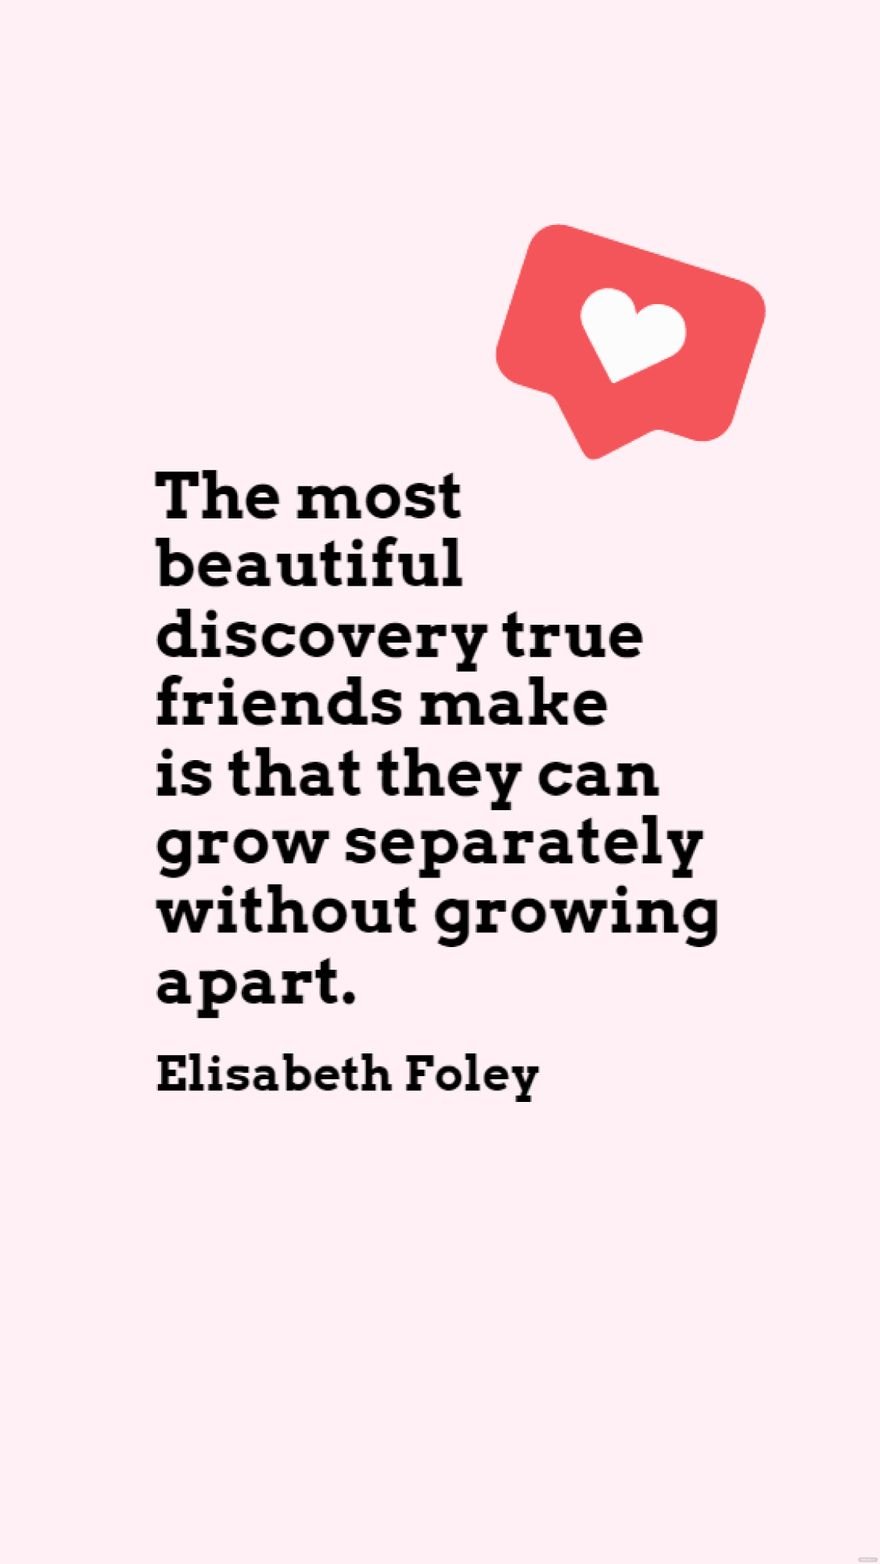 Elisabeth Foley - The most beautiful discovery true friends make is that they can grow separately without growing apart.